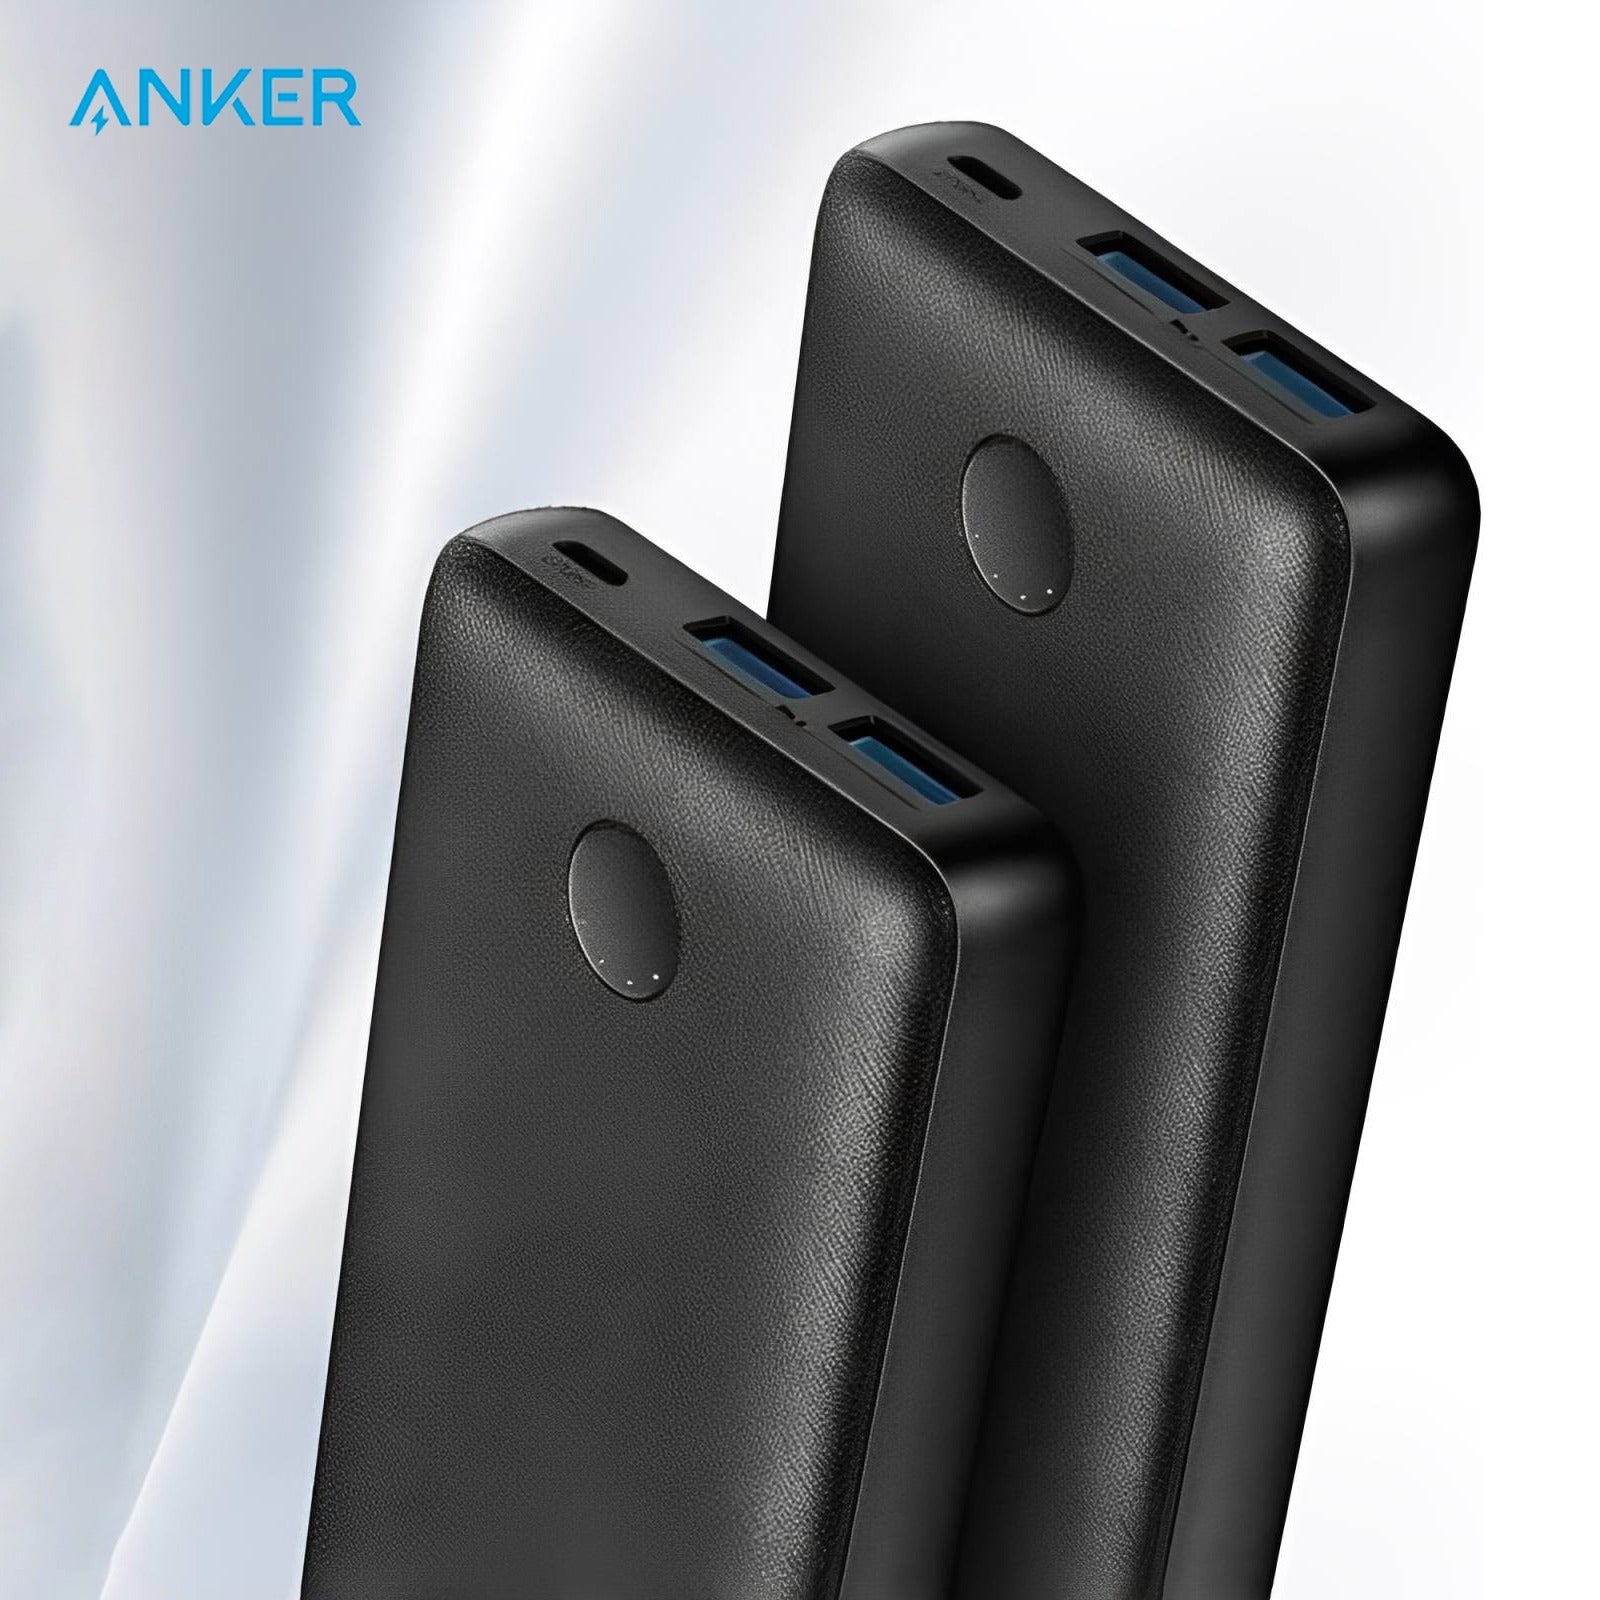 Anker PowerCore Select 20000mAh Power Bank  A1363H11 in black color